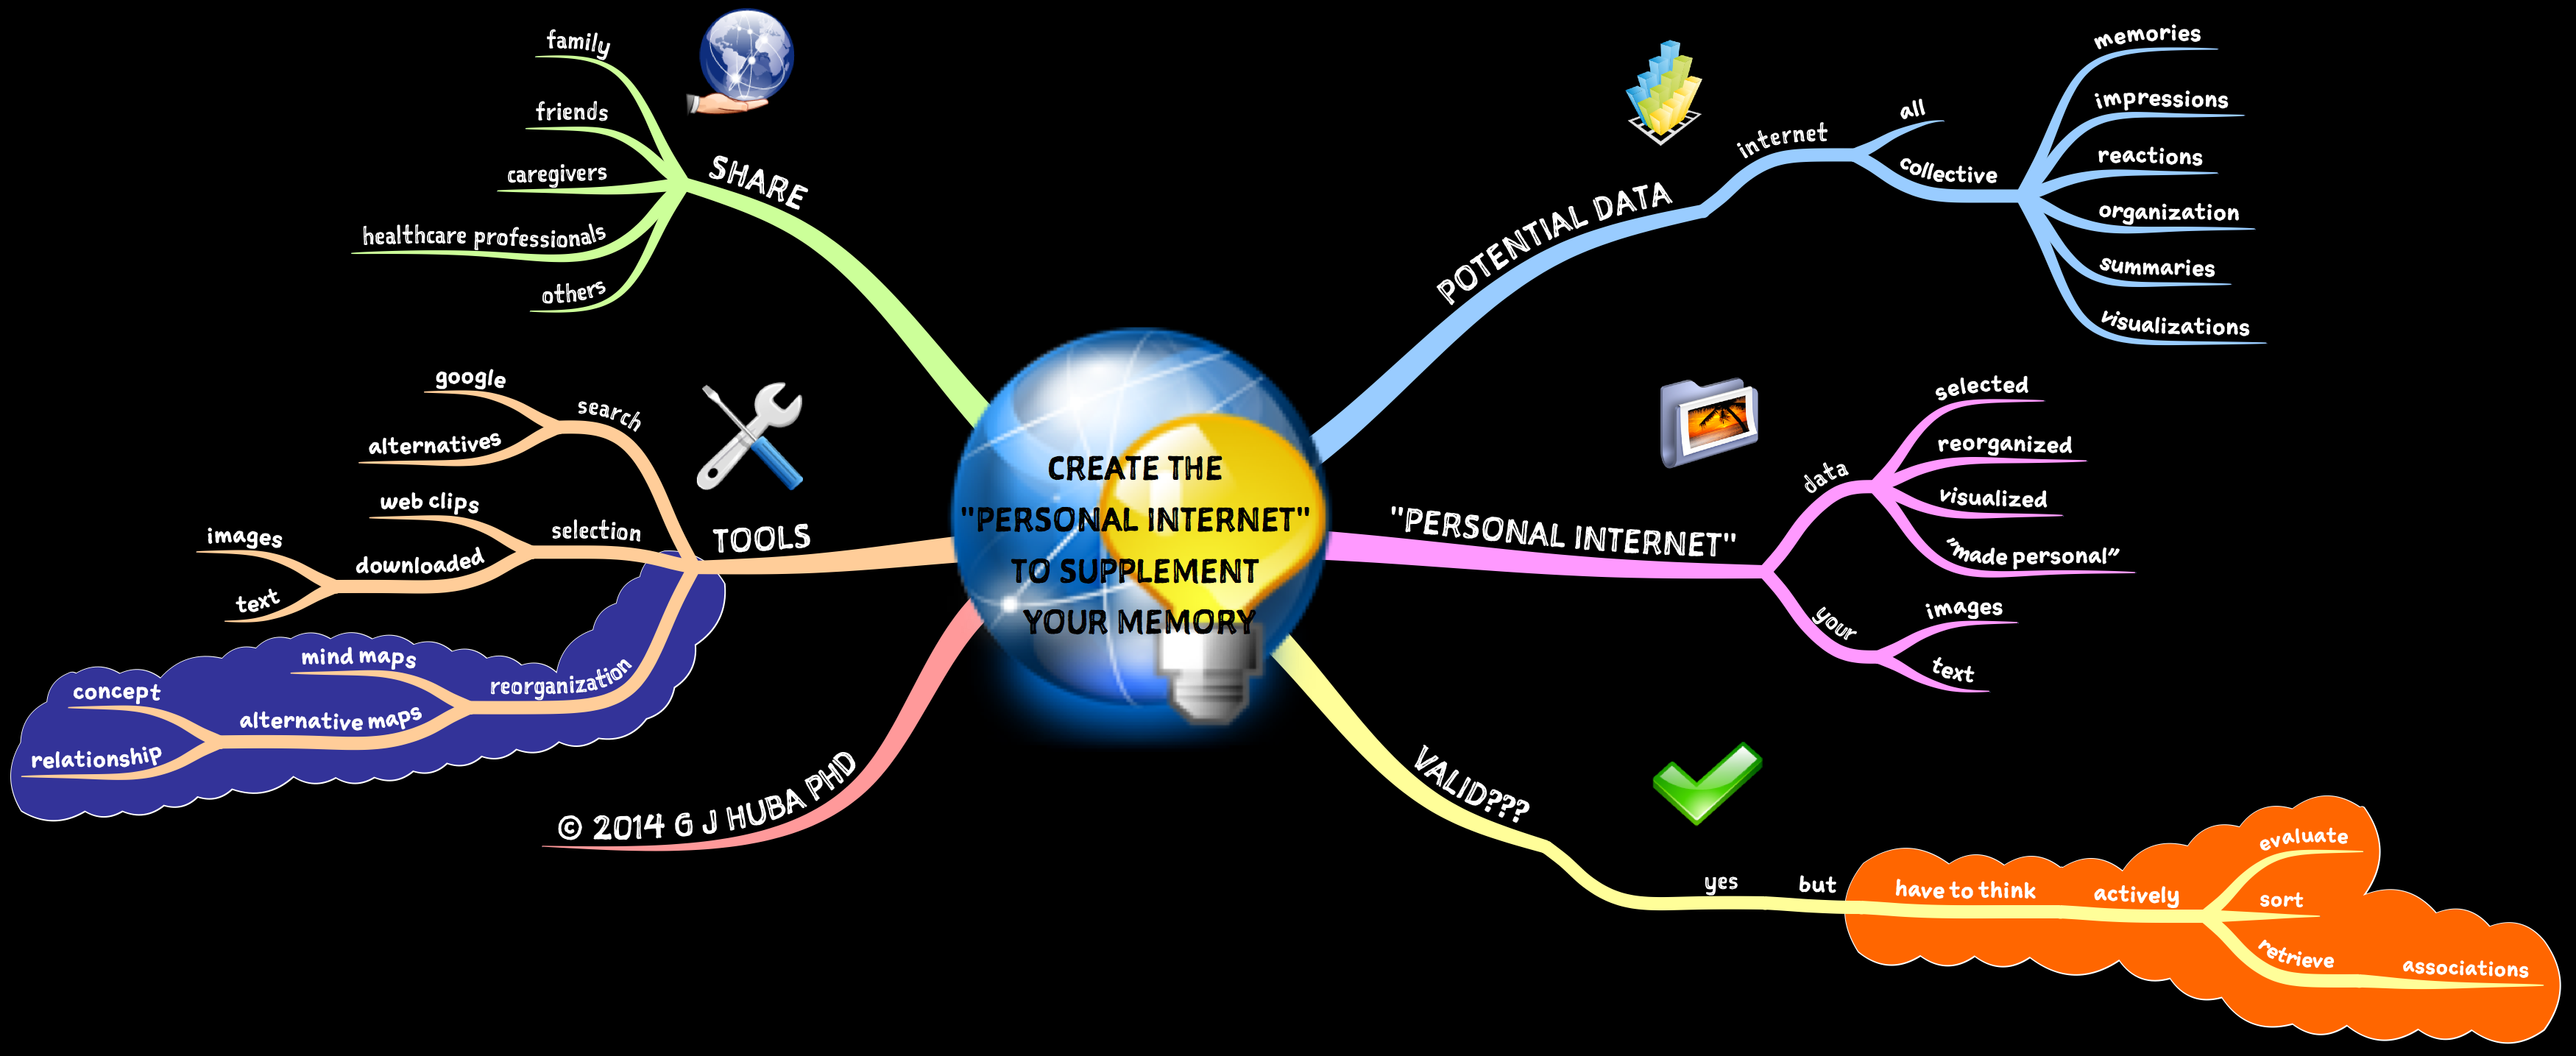 CREATE THE  PERSONAL INTERNET  TO SUPPLEMENT  YOUR MEMORY